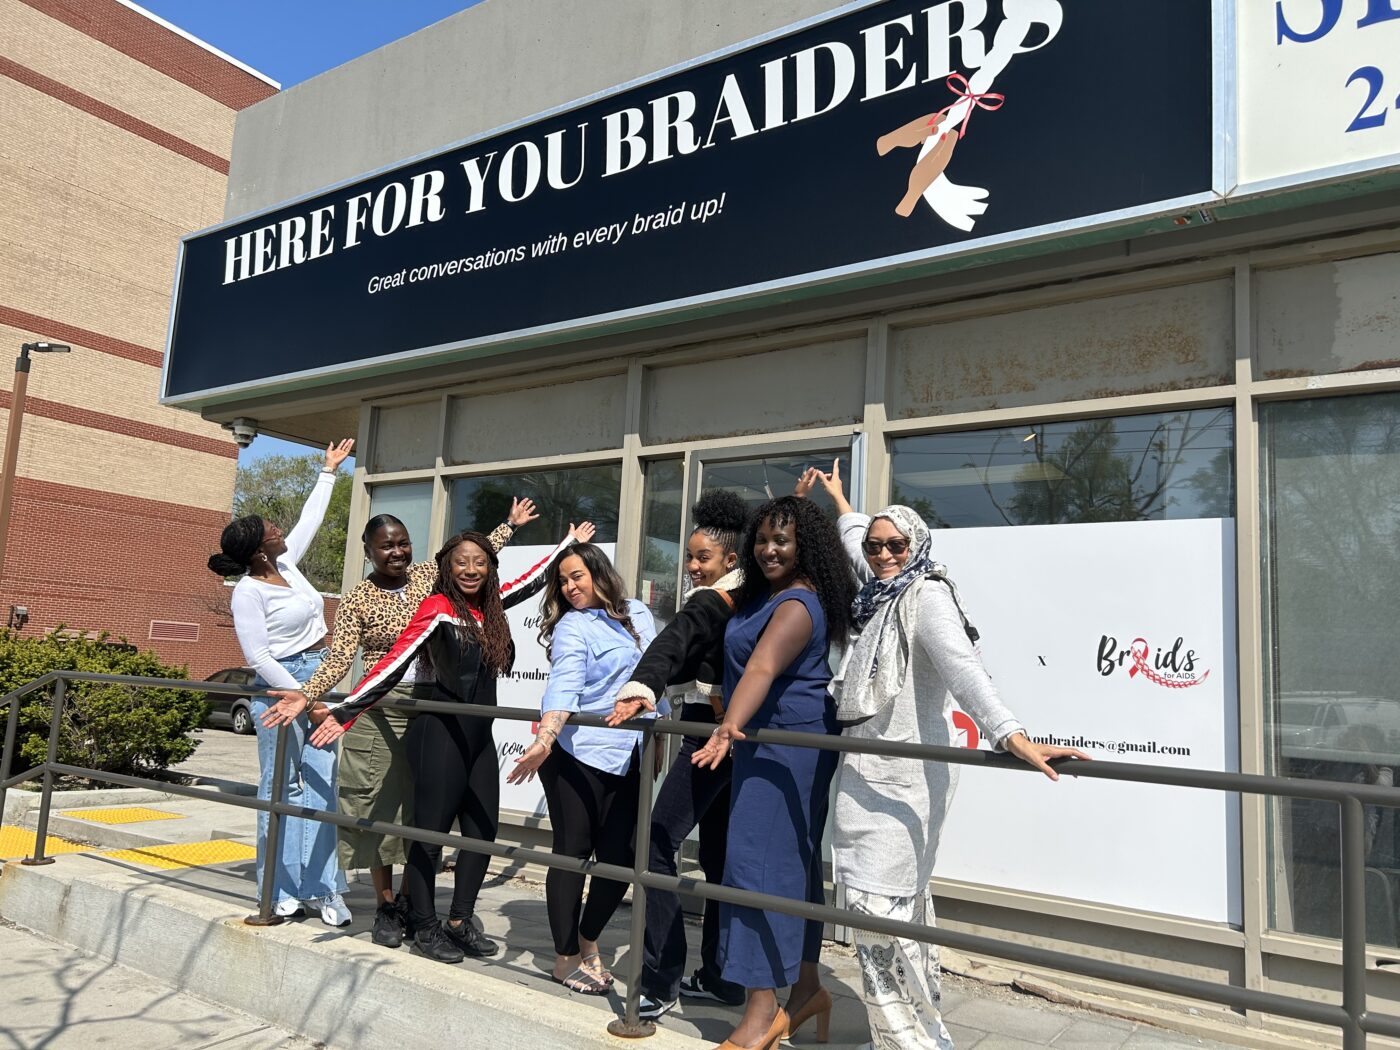 The BrAIDS for AIDS team stand in front of their first salon location in Keelesdale-Eglinton West.